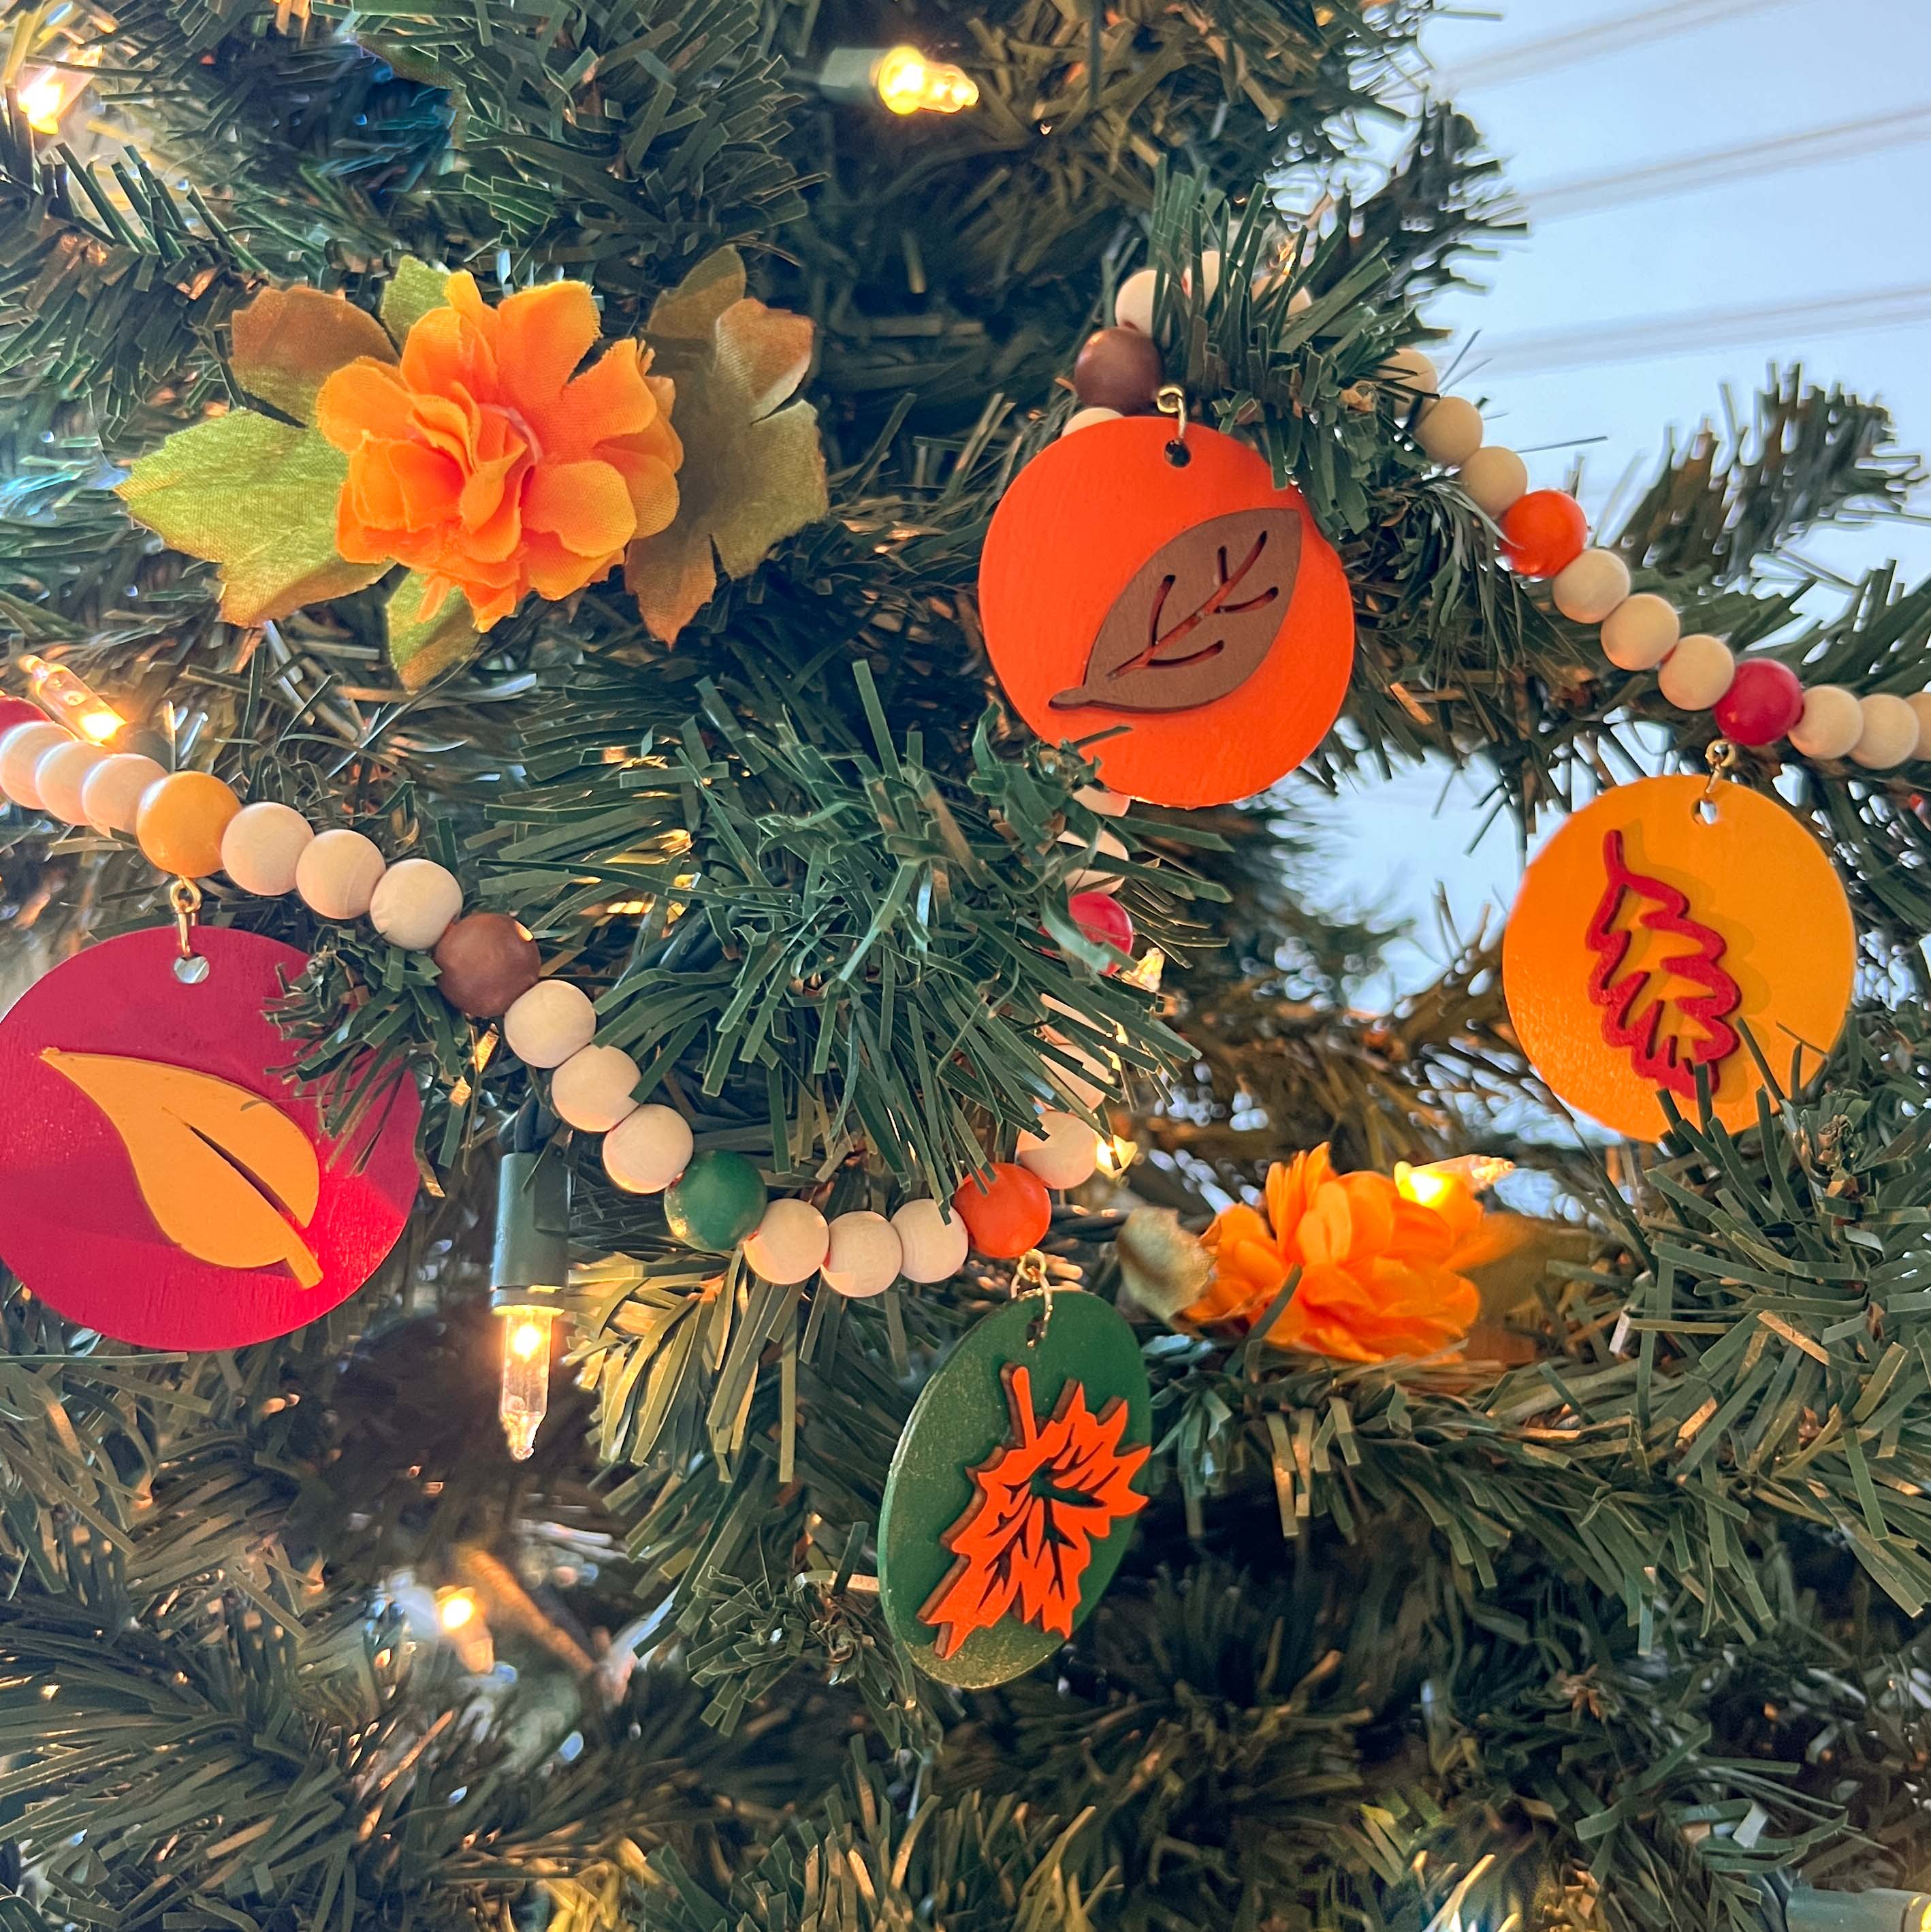 Image shows a wood bead garland with 2" wood circles that feature various colored fall leaves. Circles hang from painted beads with natural wood beads are interspersed. Beads are strung on 2mm orange macrame cord with 3" loops on each end.